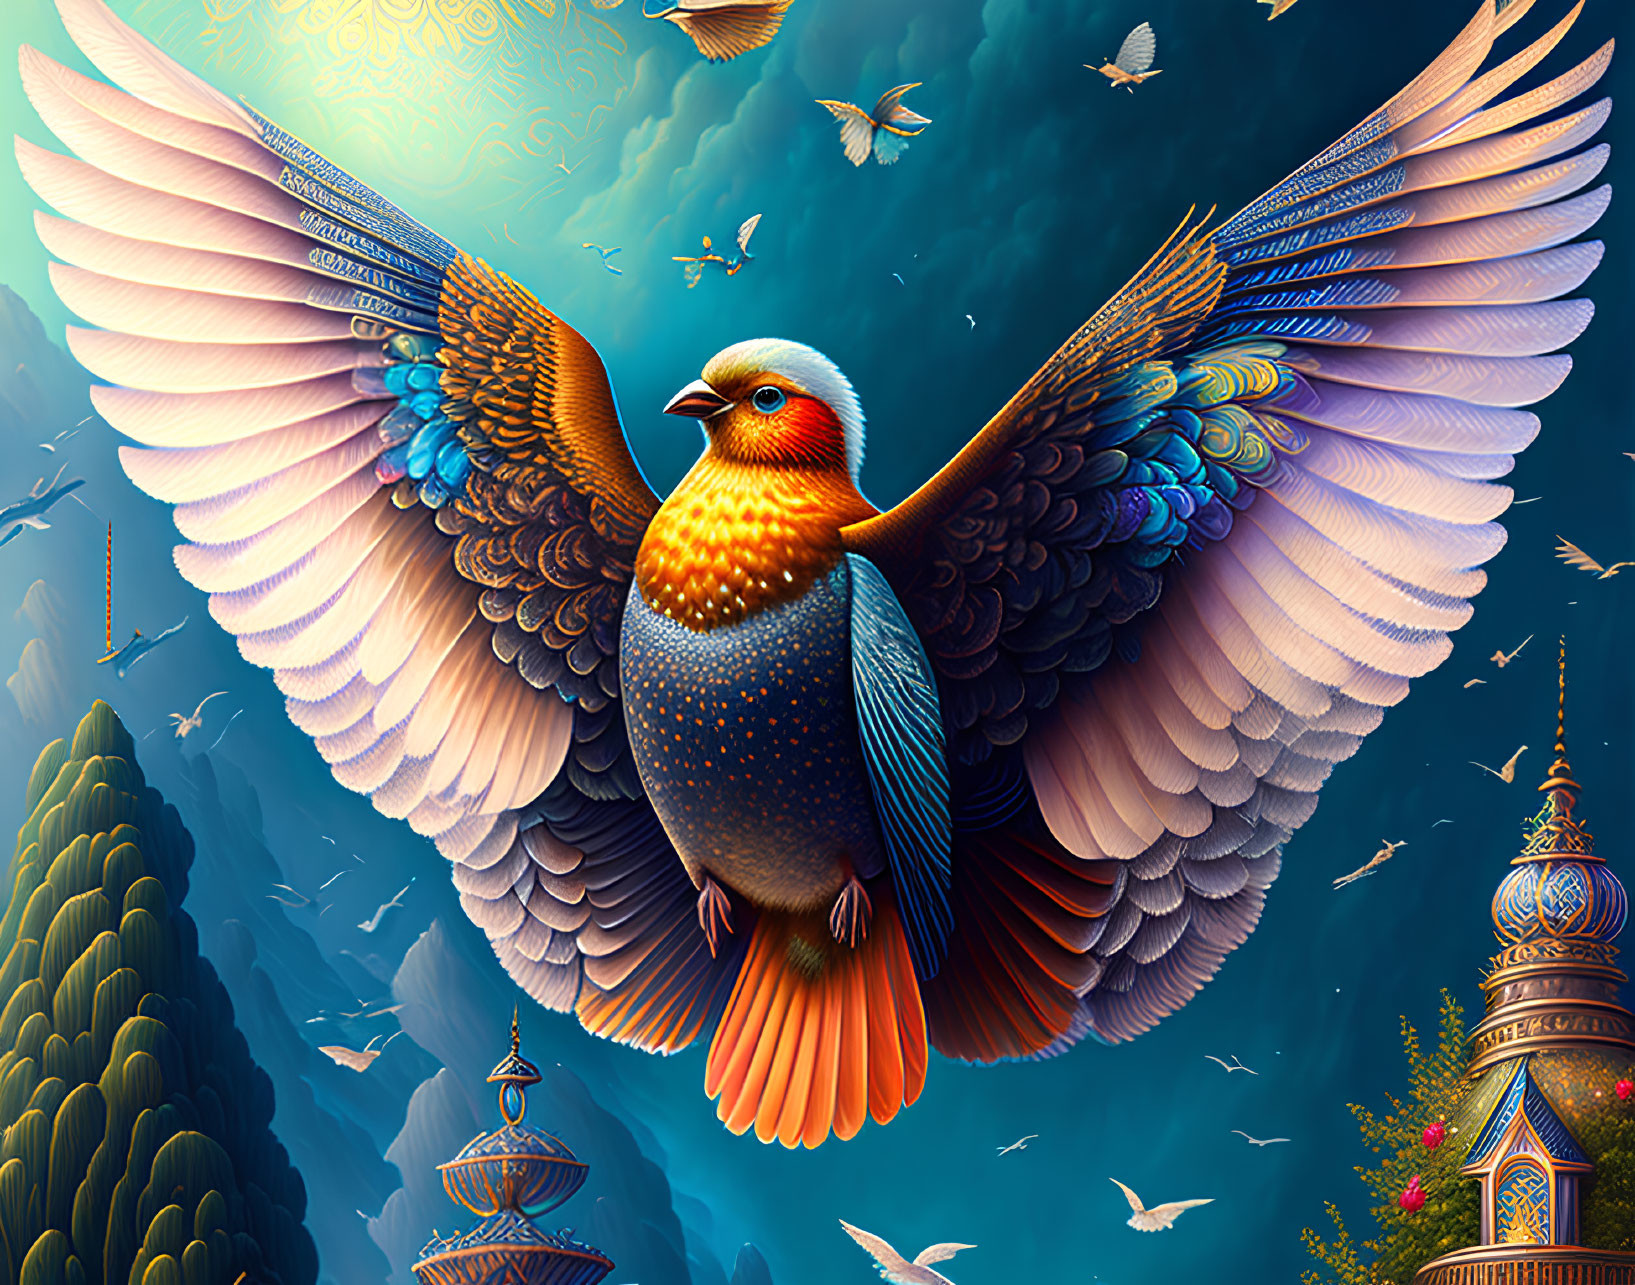 Colorful bird illustration in fantasy landscape with intricate patterns